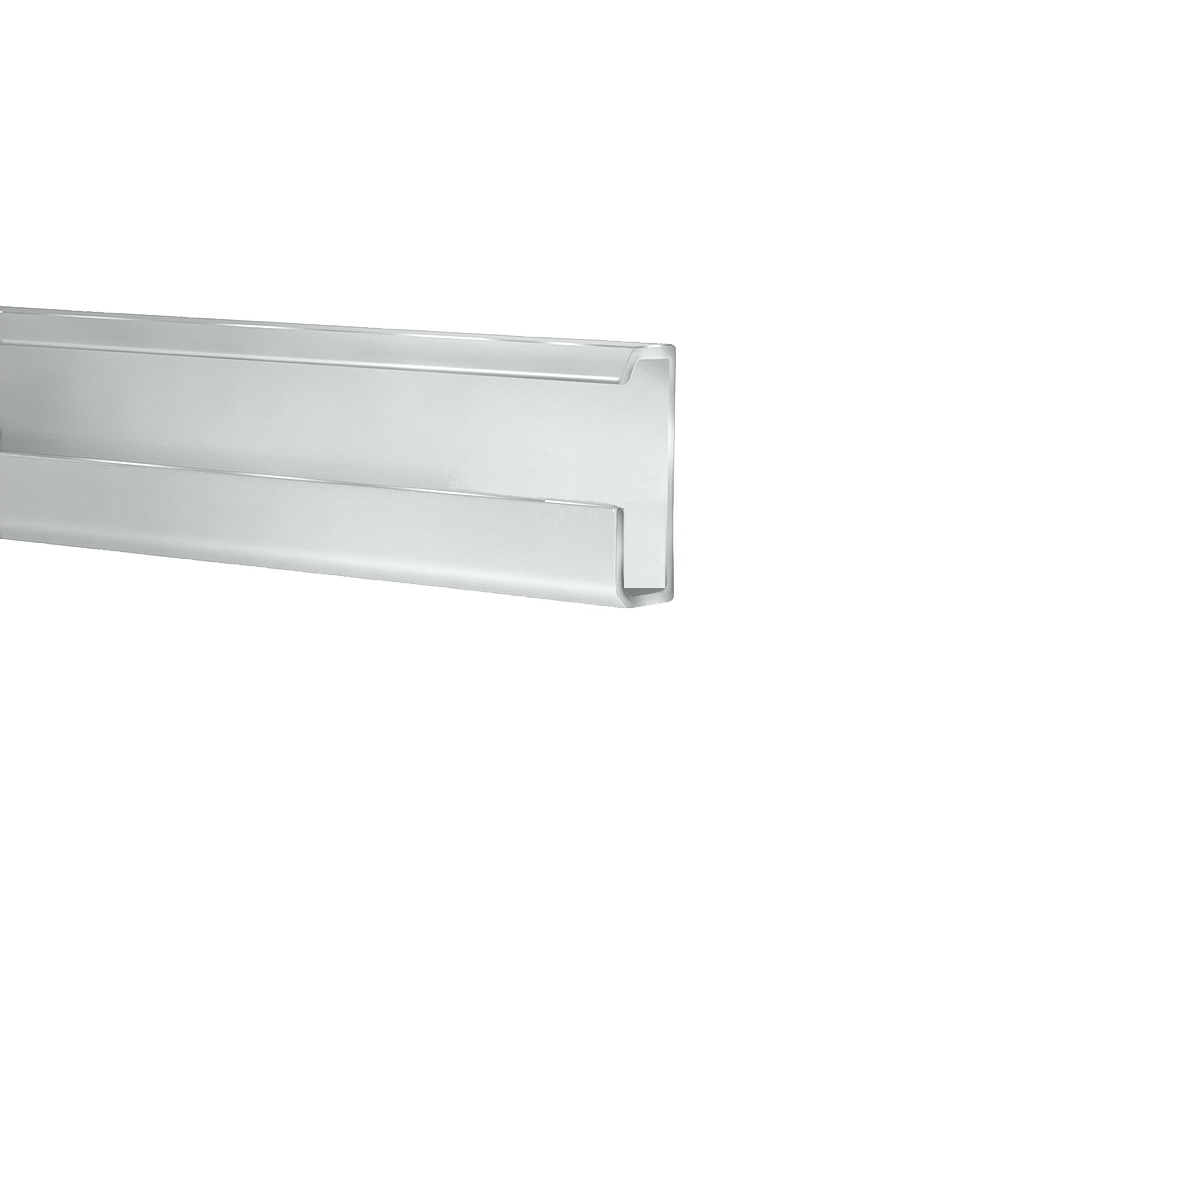 Classic Rail System, Clear Anodized Finish